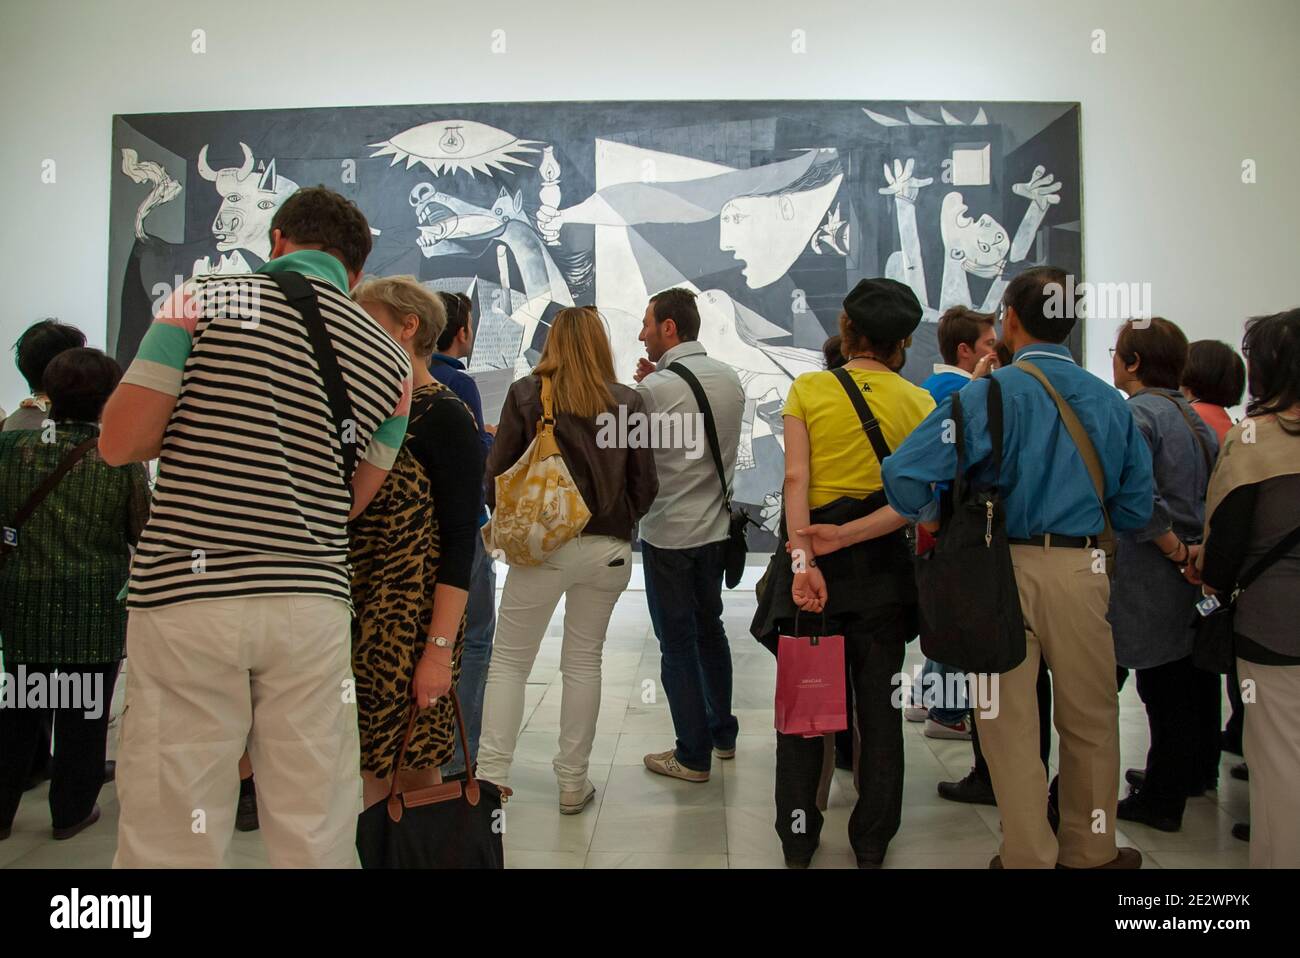 A crowd gathers to view Guernica by Pablo Picasso in Museo Reina Sofia Madrid Spain Stock Photo